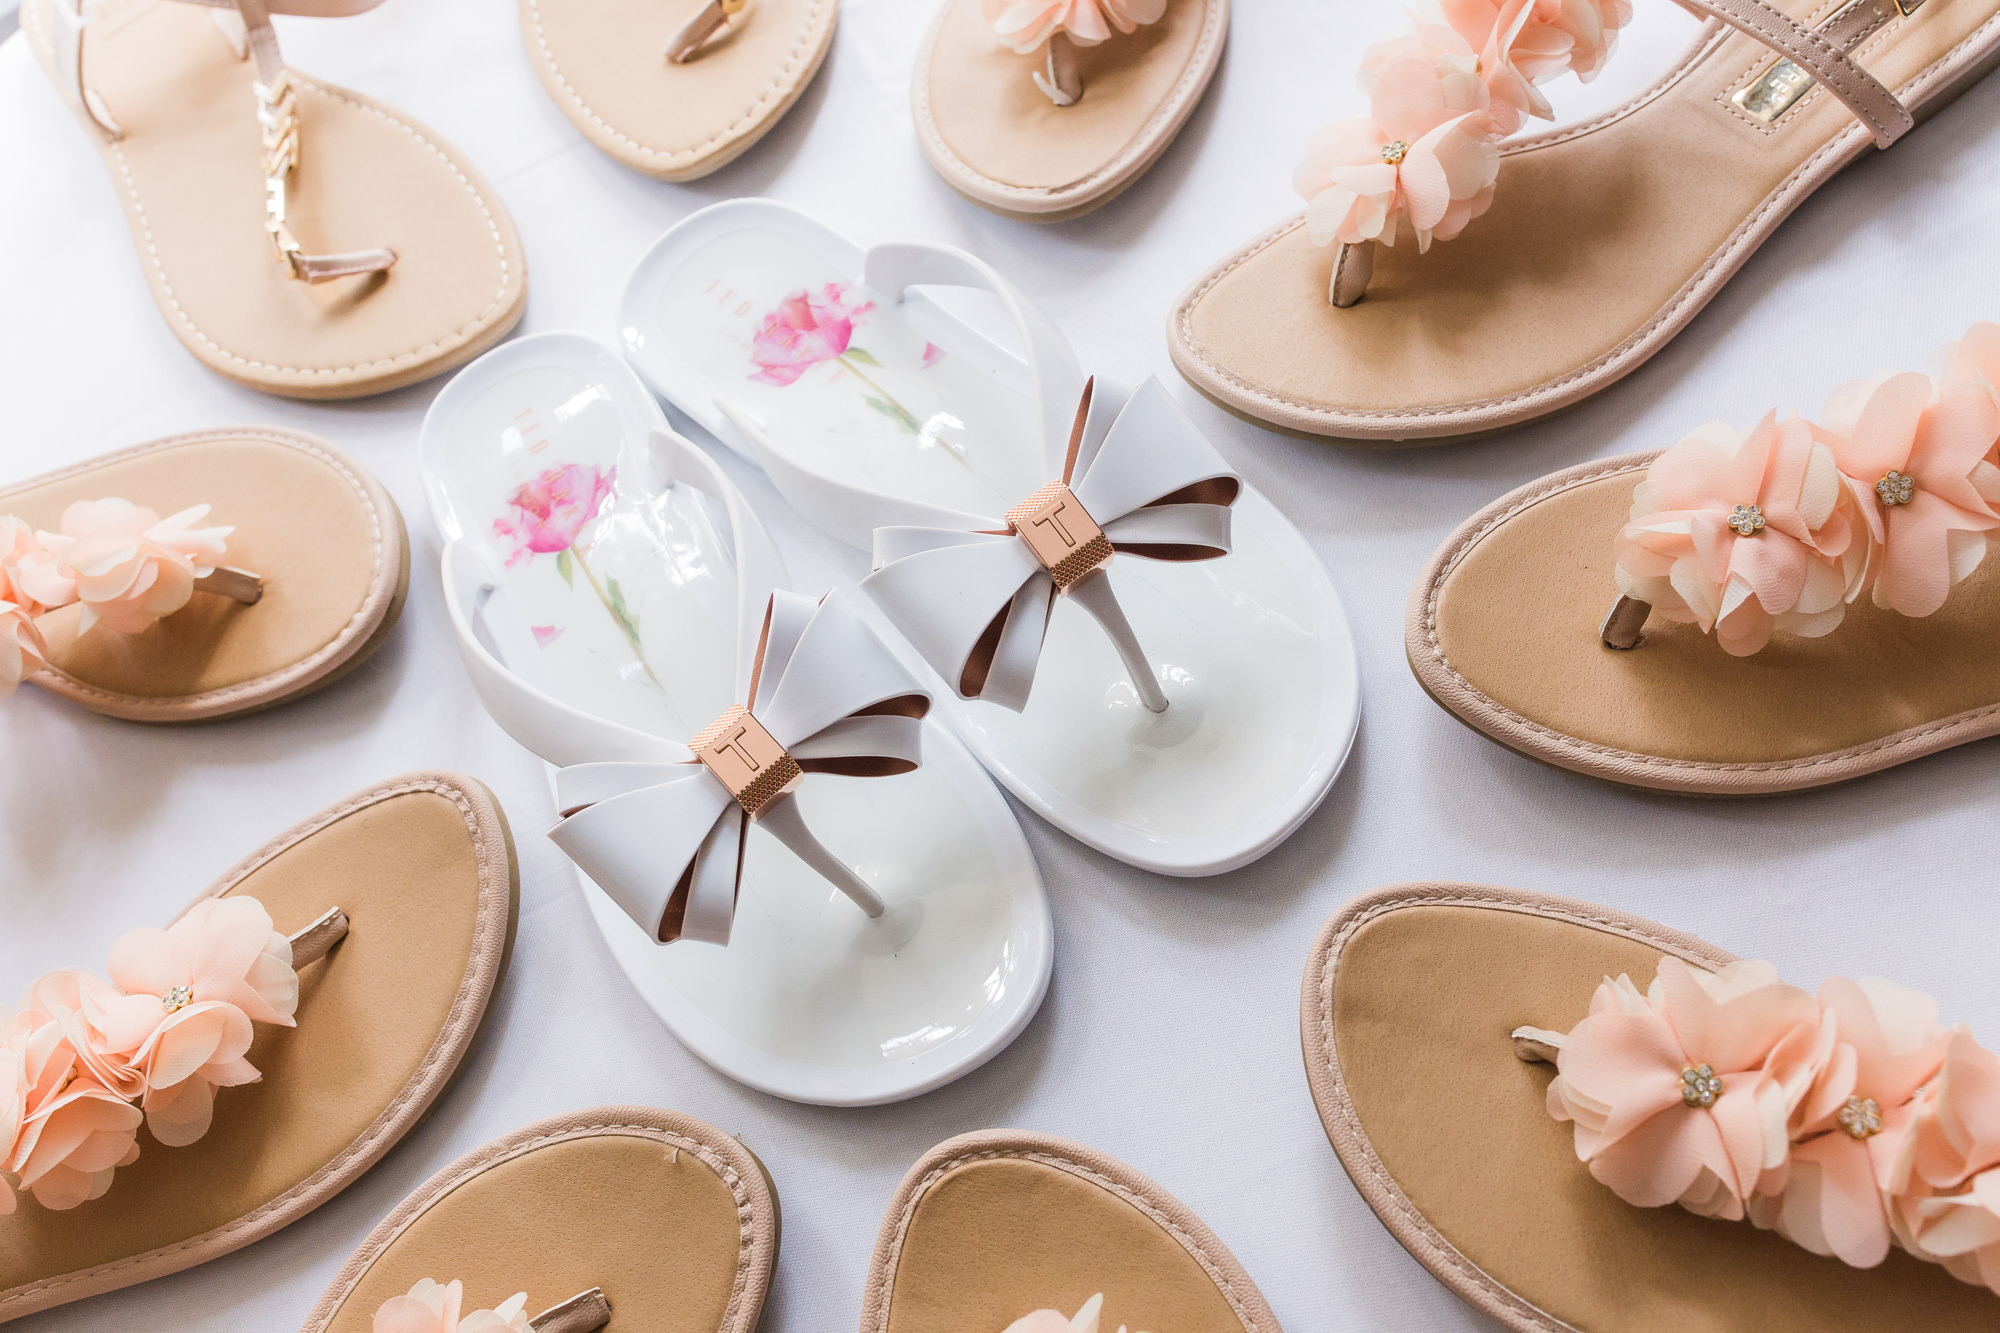 bride and bridesmaids shoes featuring ted baker sandals